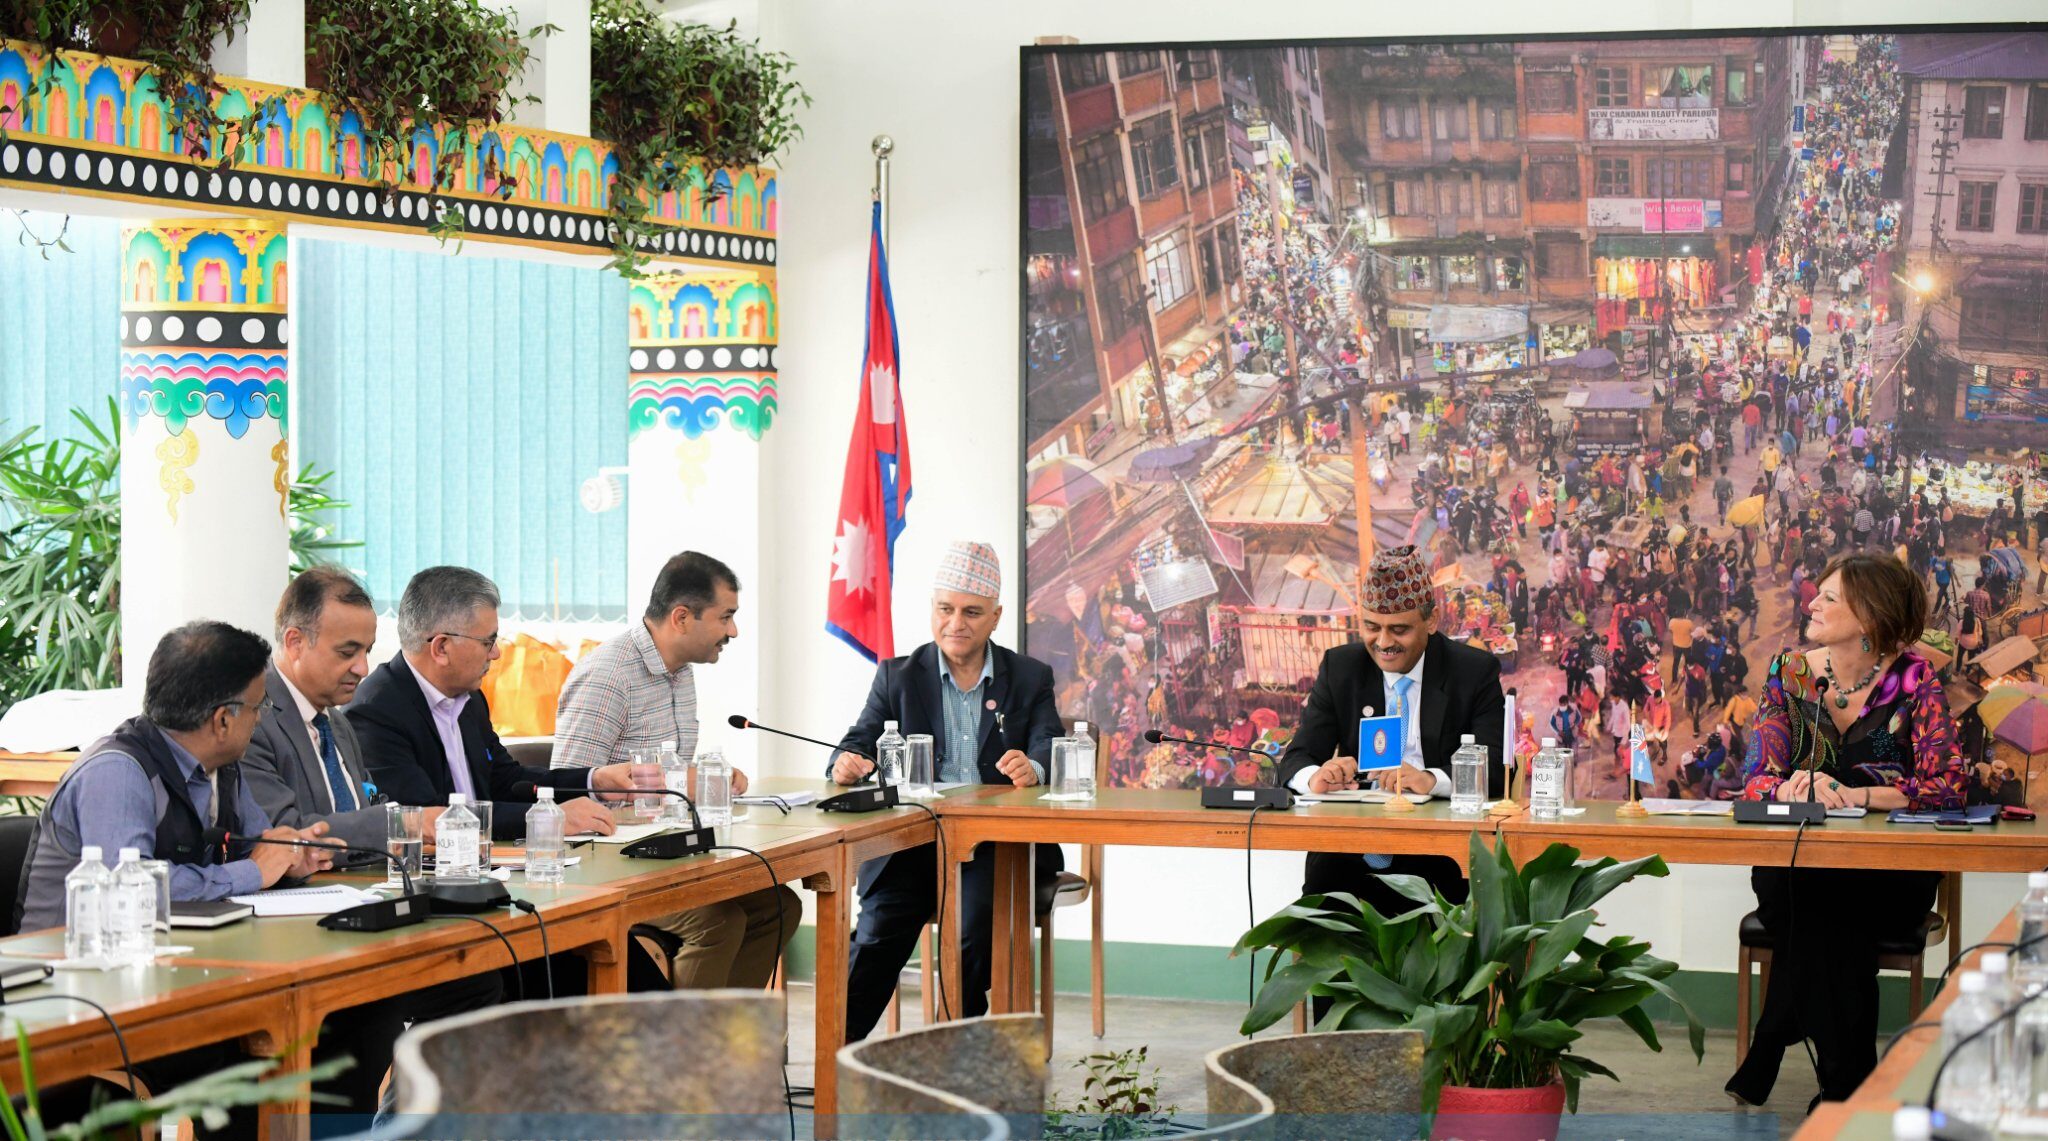 A delegation of senior Australian Government officials (Study Australia) led by Australia’s Ambassador to Nepal, HE Felicity Volk discussed ways to strengthen educational relations, Nepalese students in Australia, Nepalese International Students Study in Australia, Felicity Volk, Australian Ambassador to Nepal, International Student, Study NSW, Nepal is Australia’s third-largest source of international students